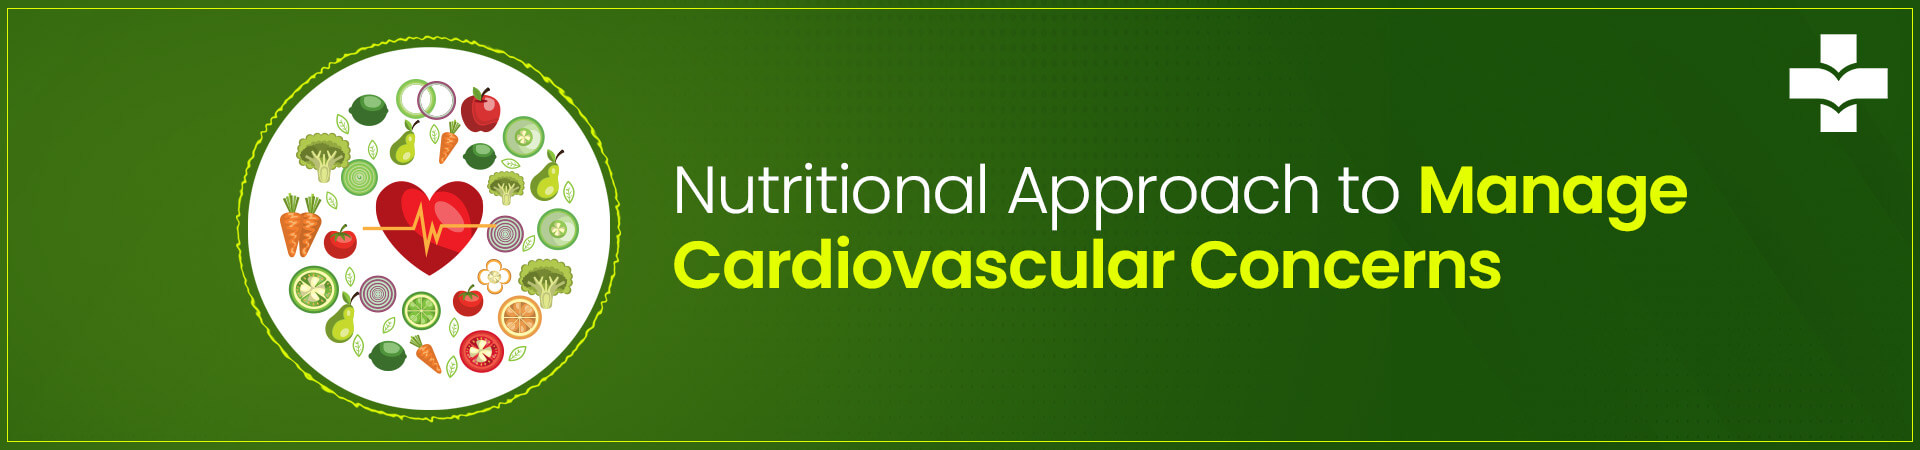 Explore a nutritional approach to effectively manage cardiovascular diseases. This article provides insights into dietary strategies and considerations for promoting heart health and preventing cardiovascular issues.